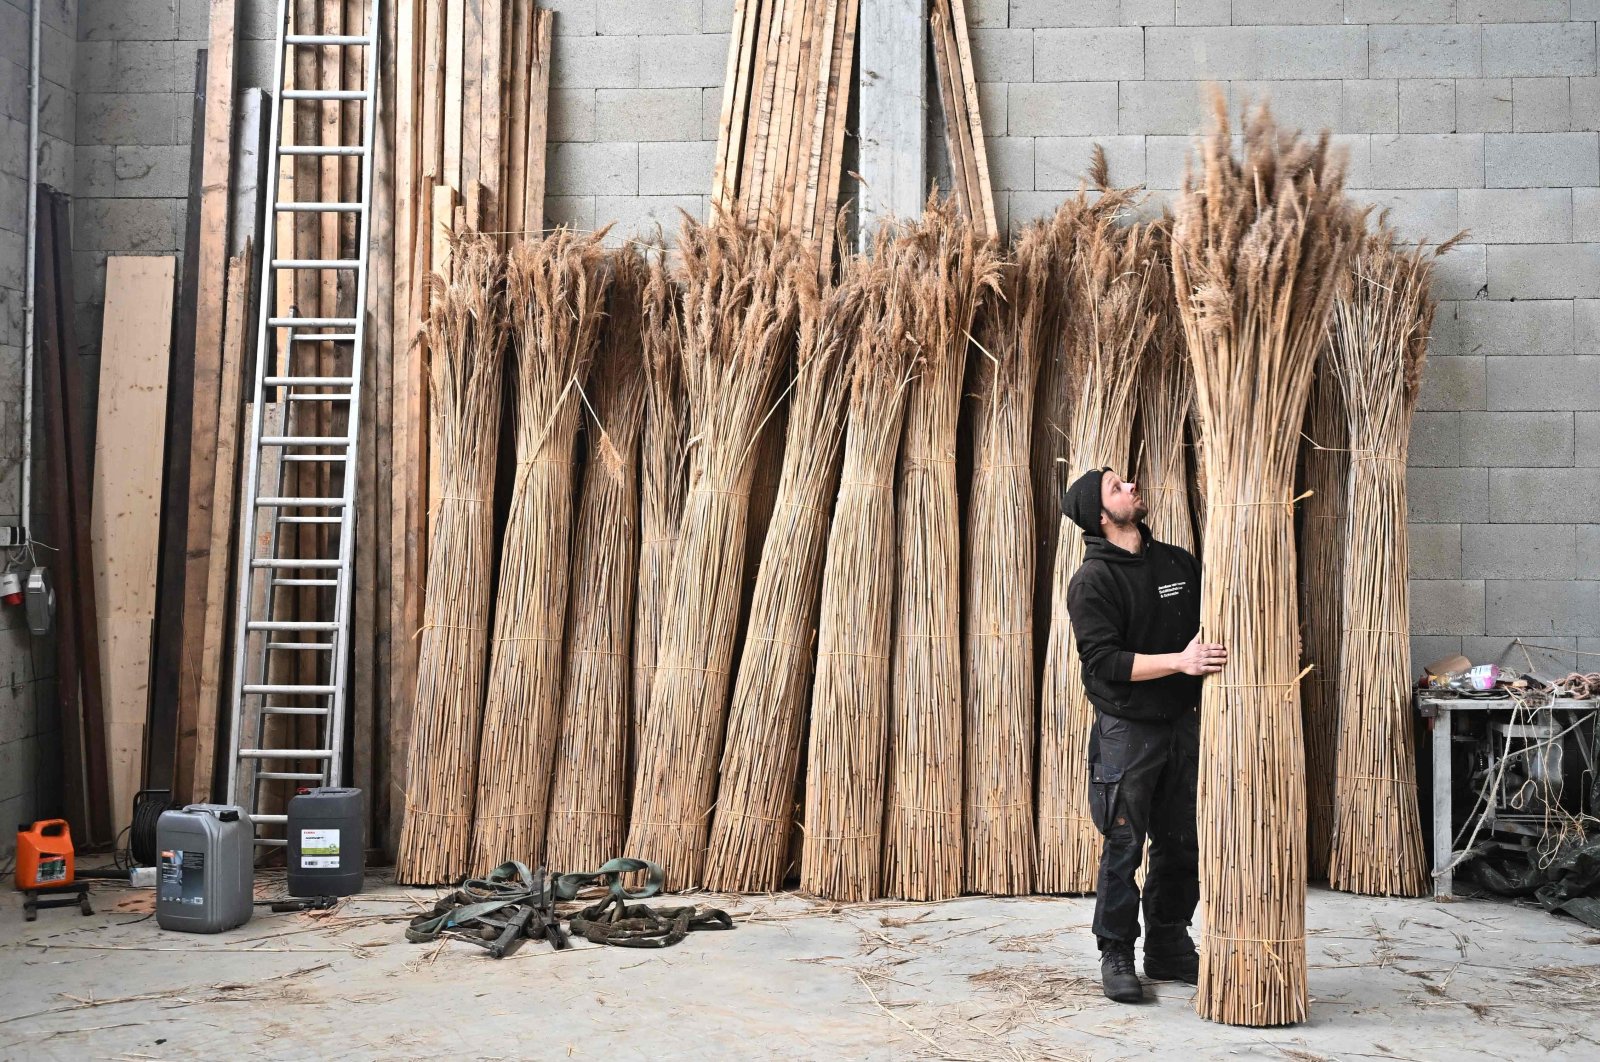 Jacobus van Hoorne checks stacks of reed at his storage at Weiden am See, Austria, March 9, 2023. (AFP Photo)